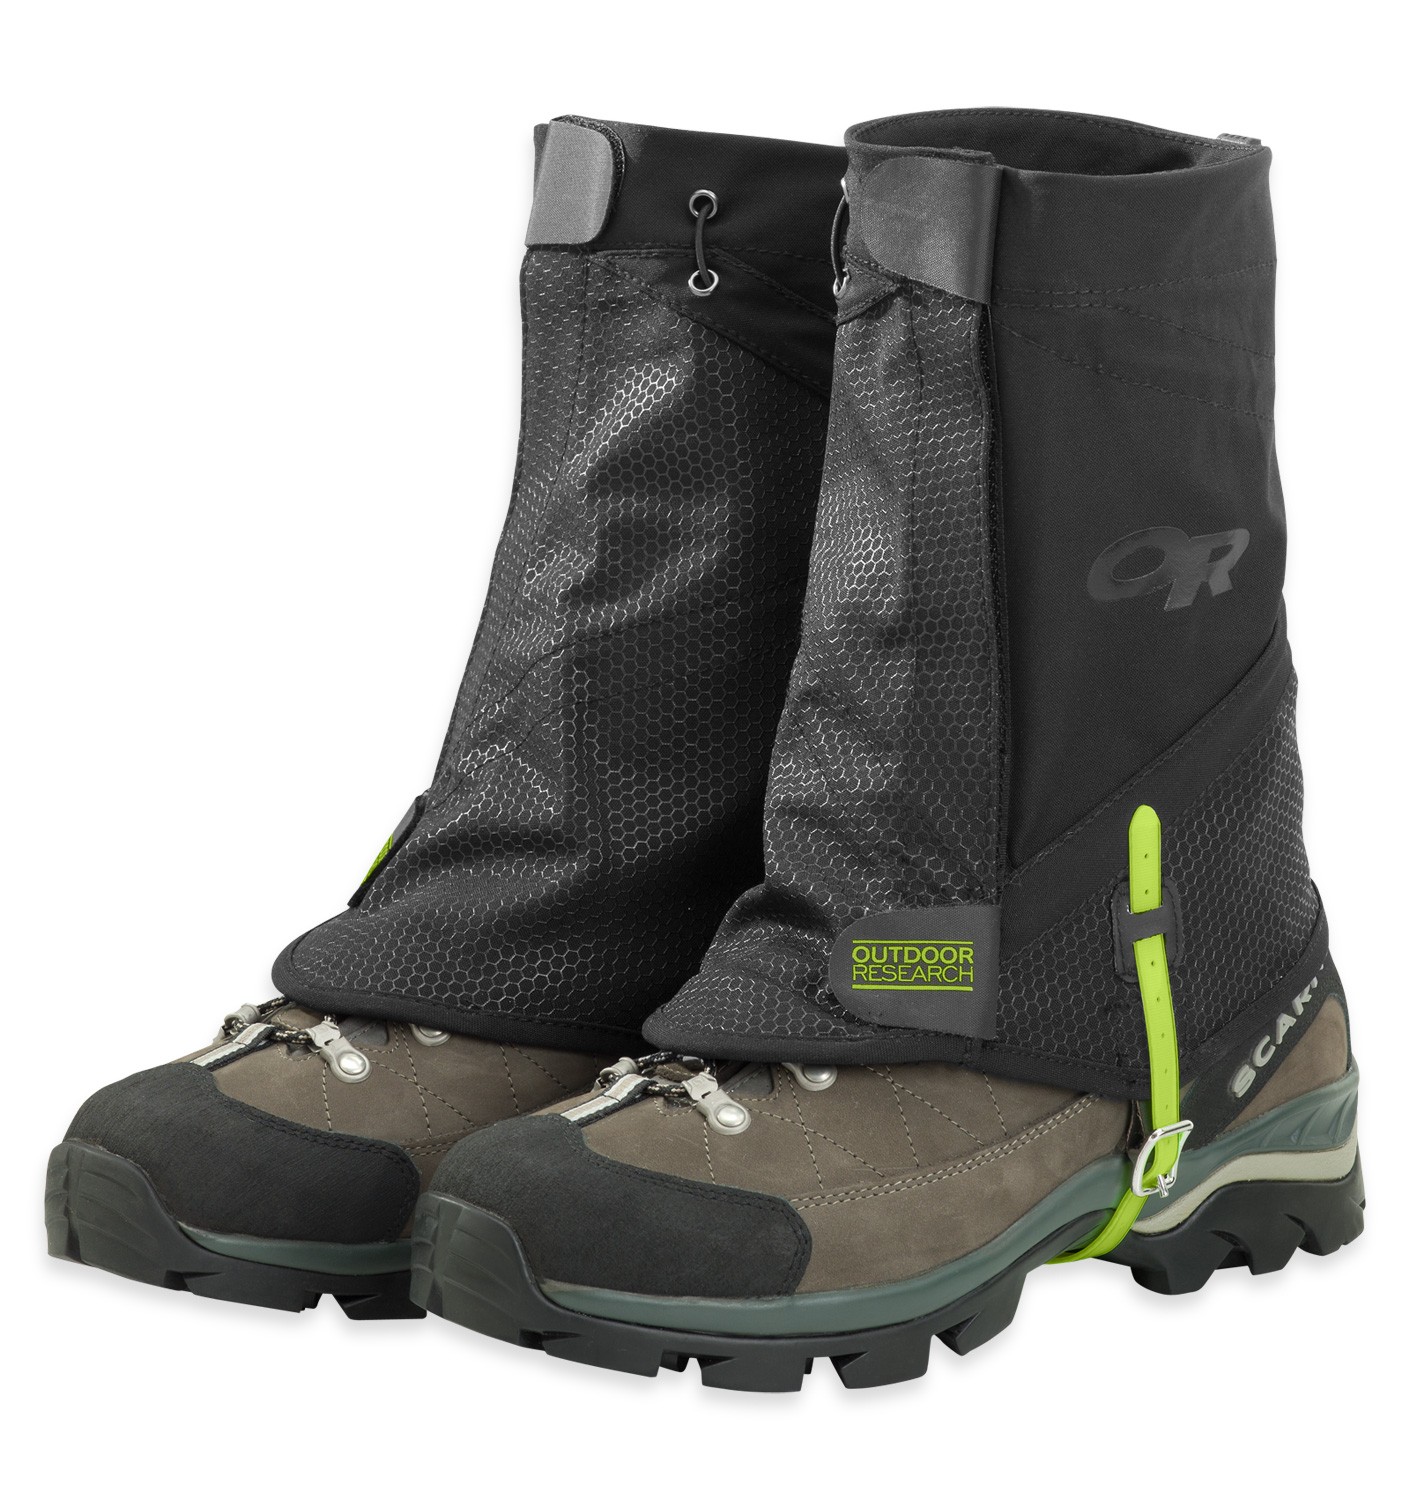 Gaiters to prevent snow from falling into the shoes.